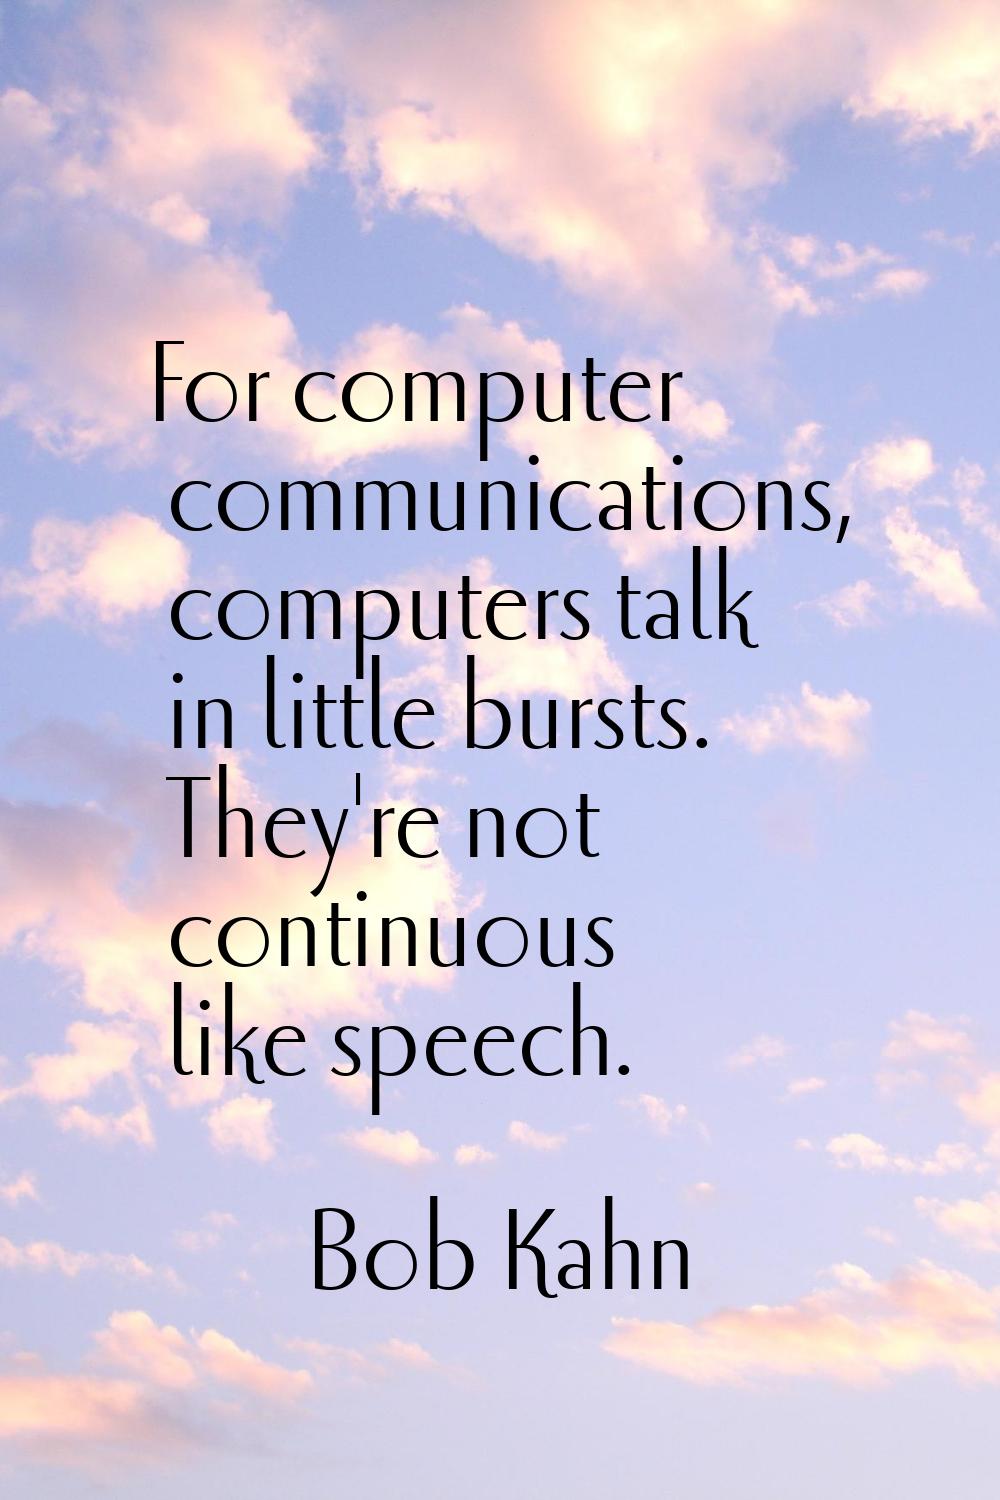 For computer communications, computers talk in little bursts. They're not continuous like speech.